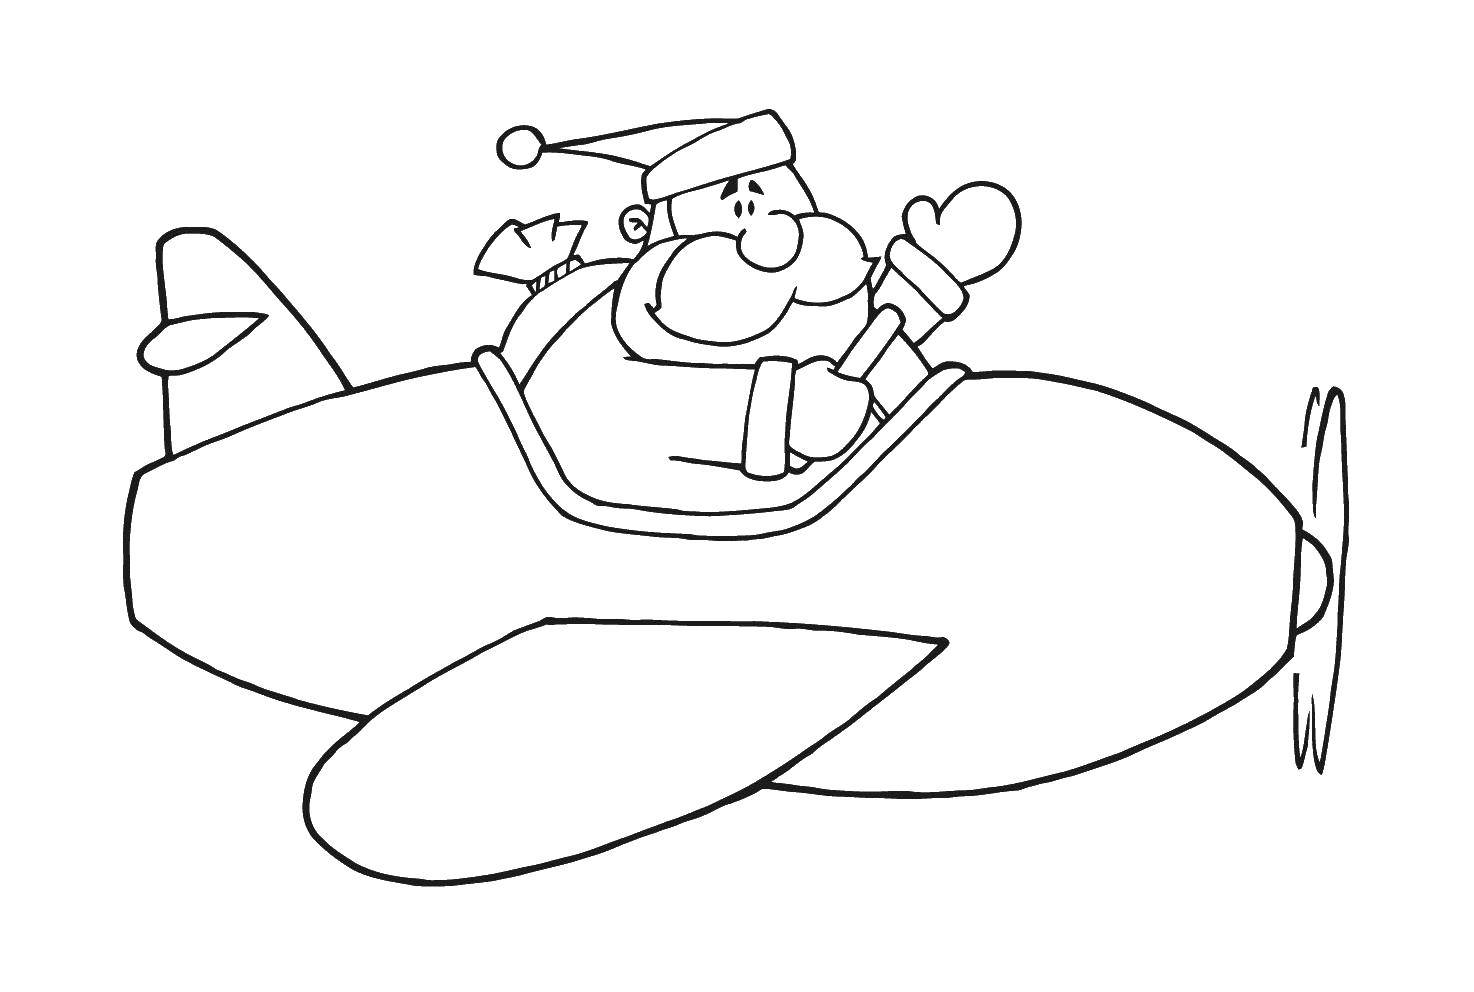 Coloring Santa Claus on the airplane. Category The planes. Tags:  Plane.